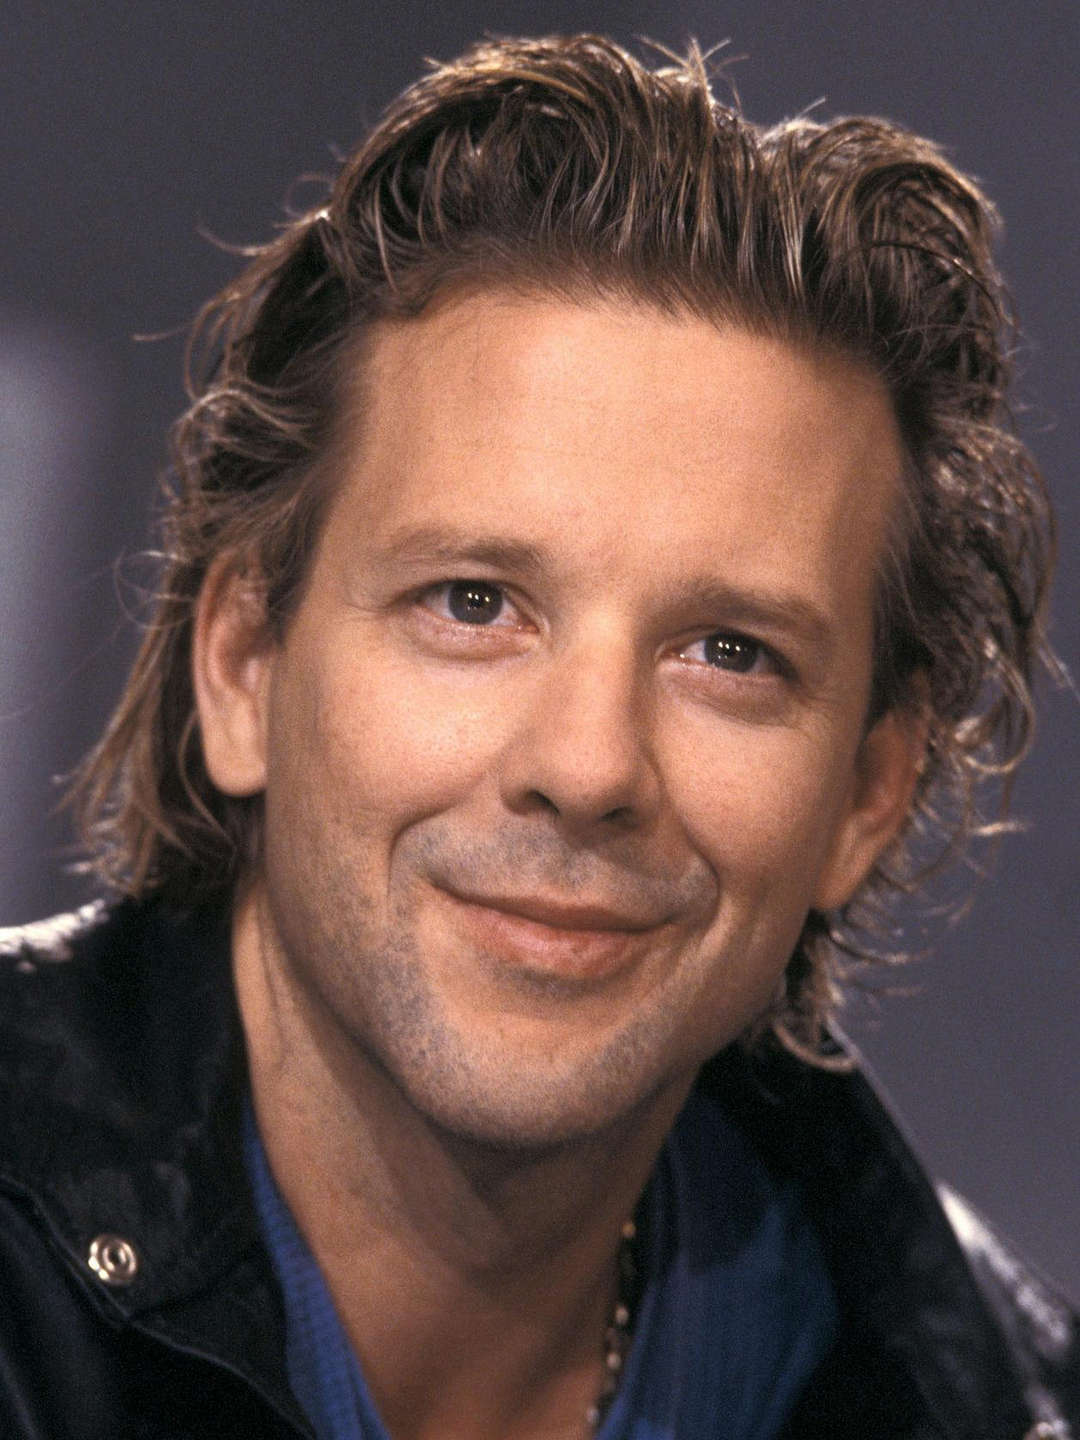 Mickey Rourke who are his parents